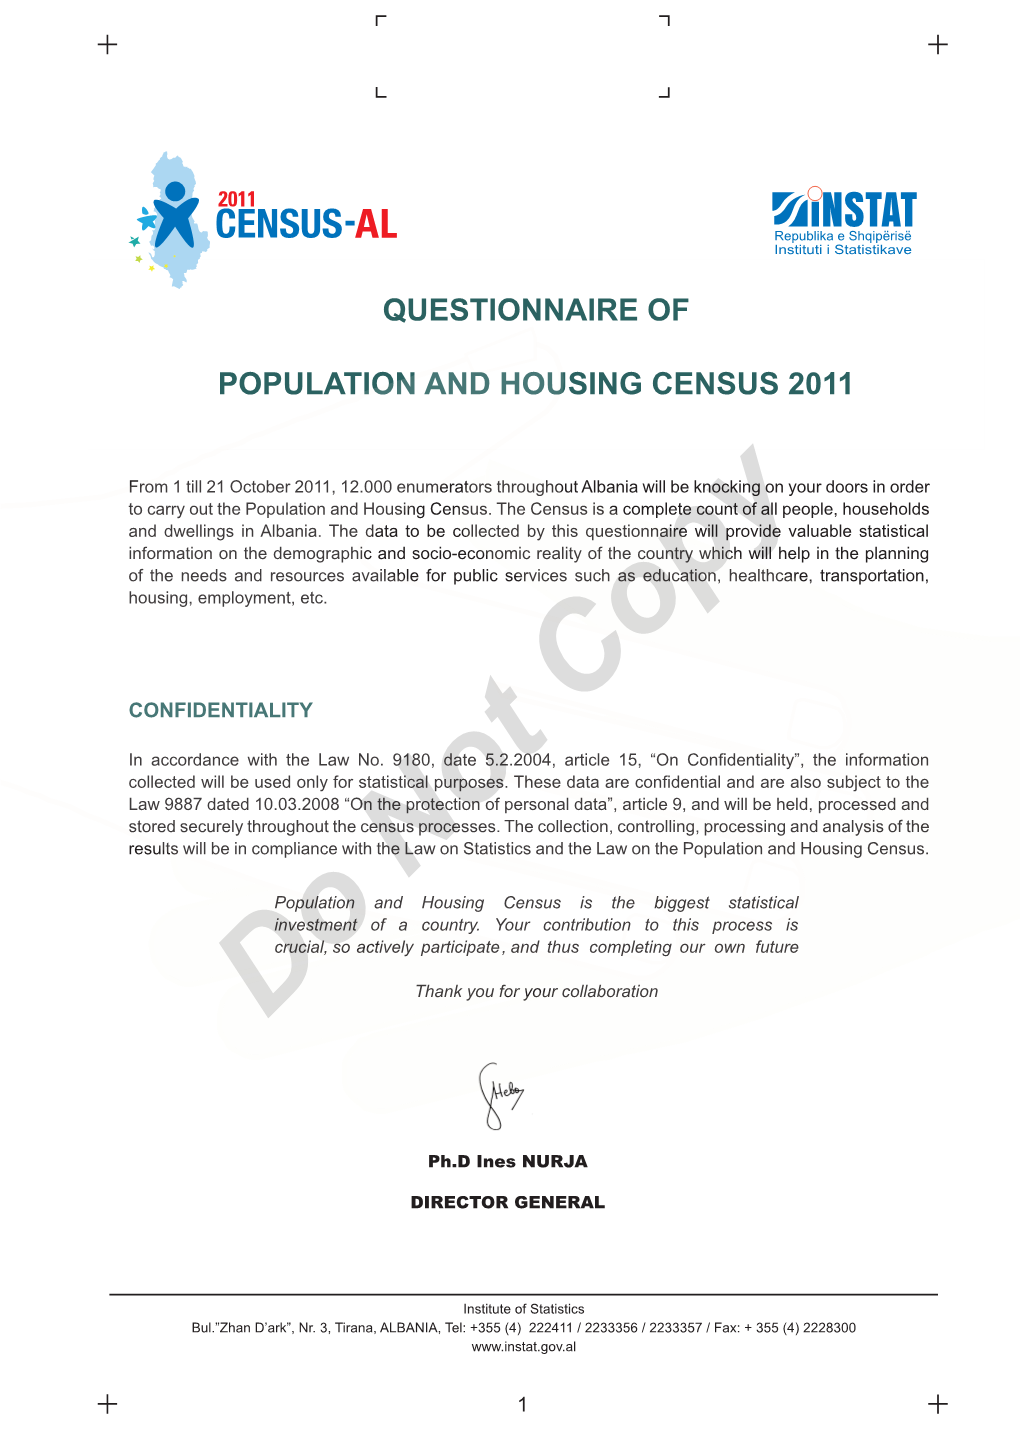 Questionnaire of Population and Housing Census 2011